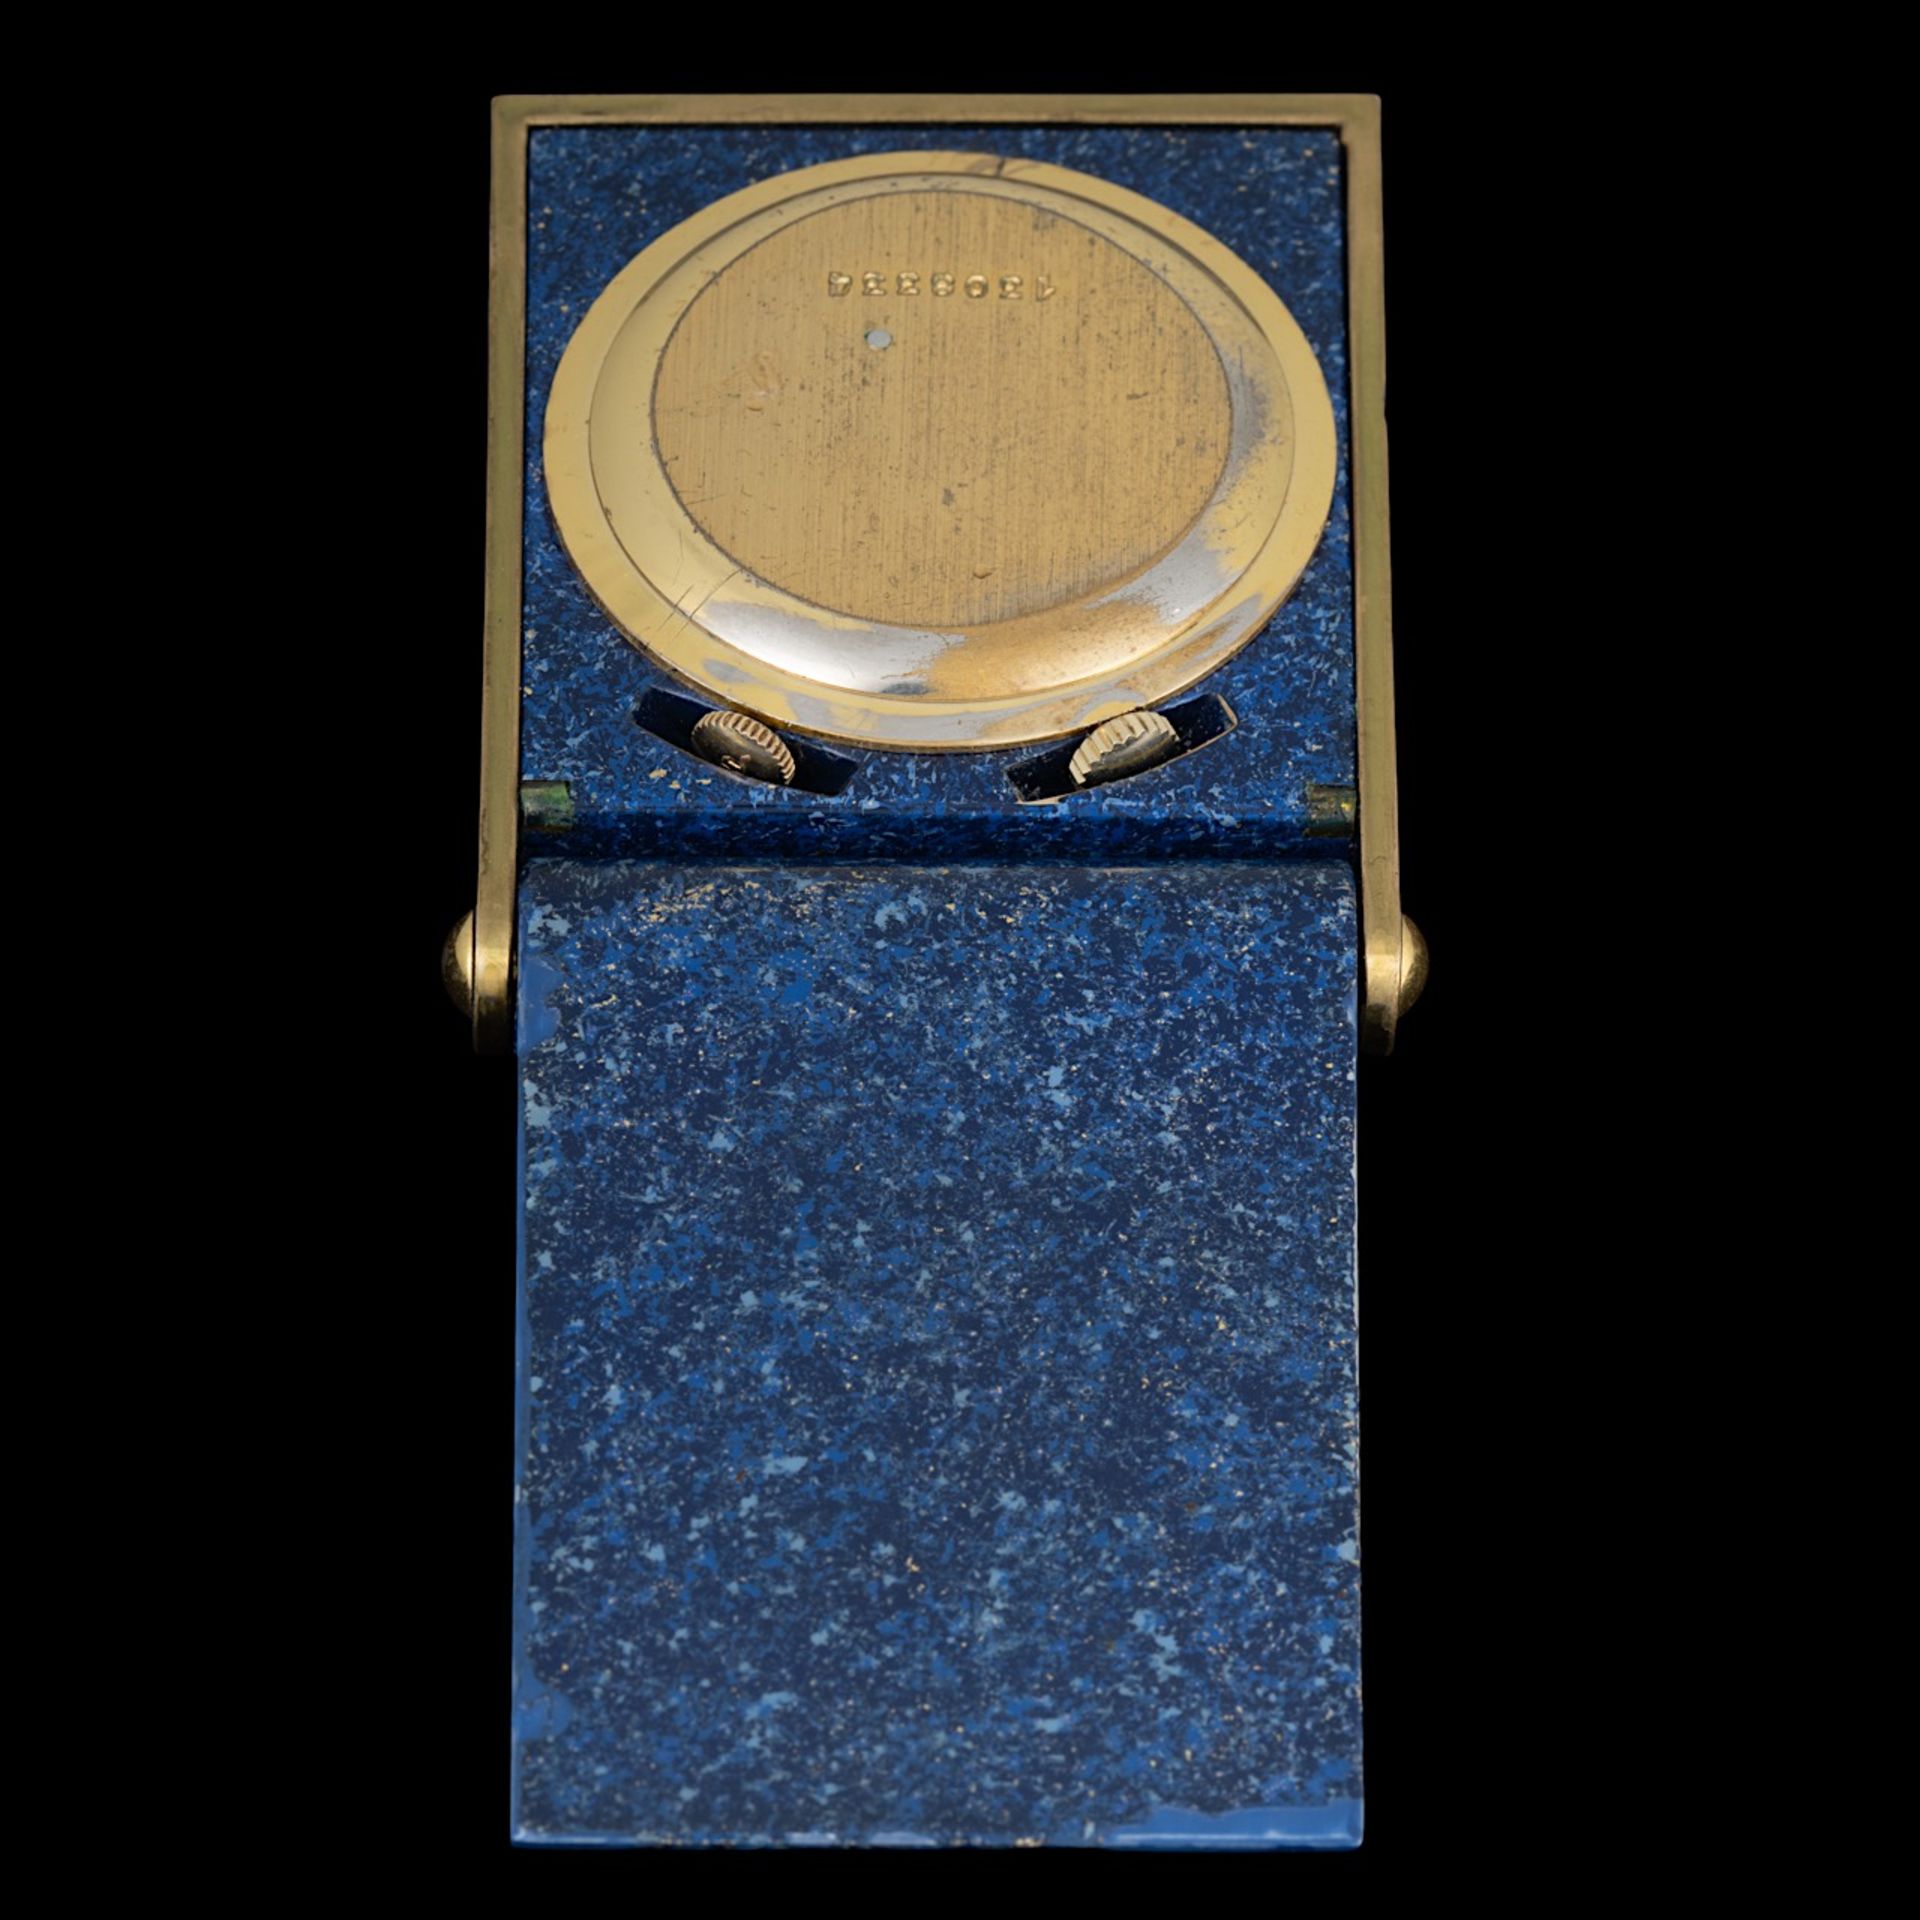 A Jaeger-LeCoultre folding travel alarm clock, W 4,3 - H 5,2 - total thickness 1,3 cm - Image 3 of 6